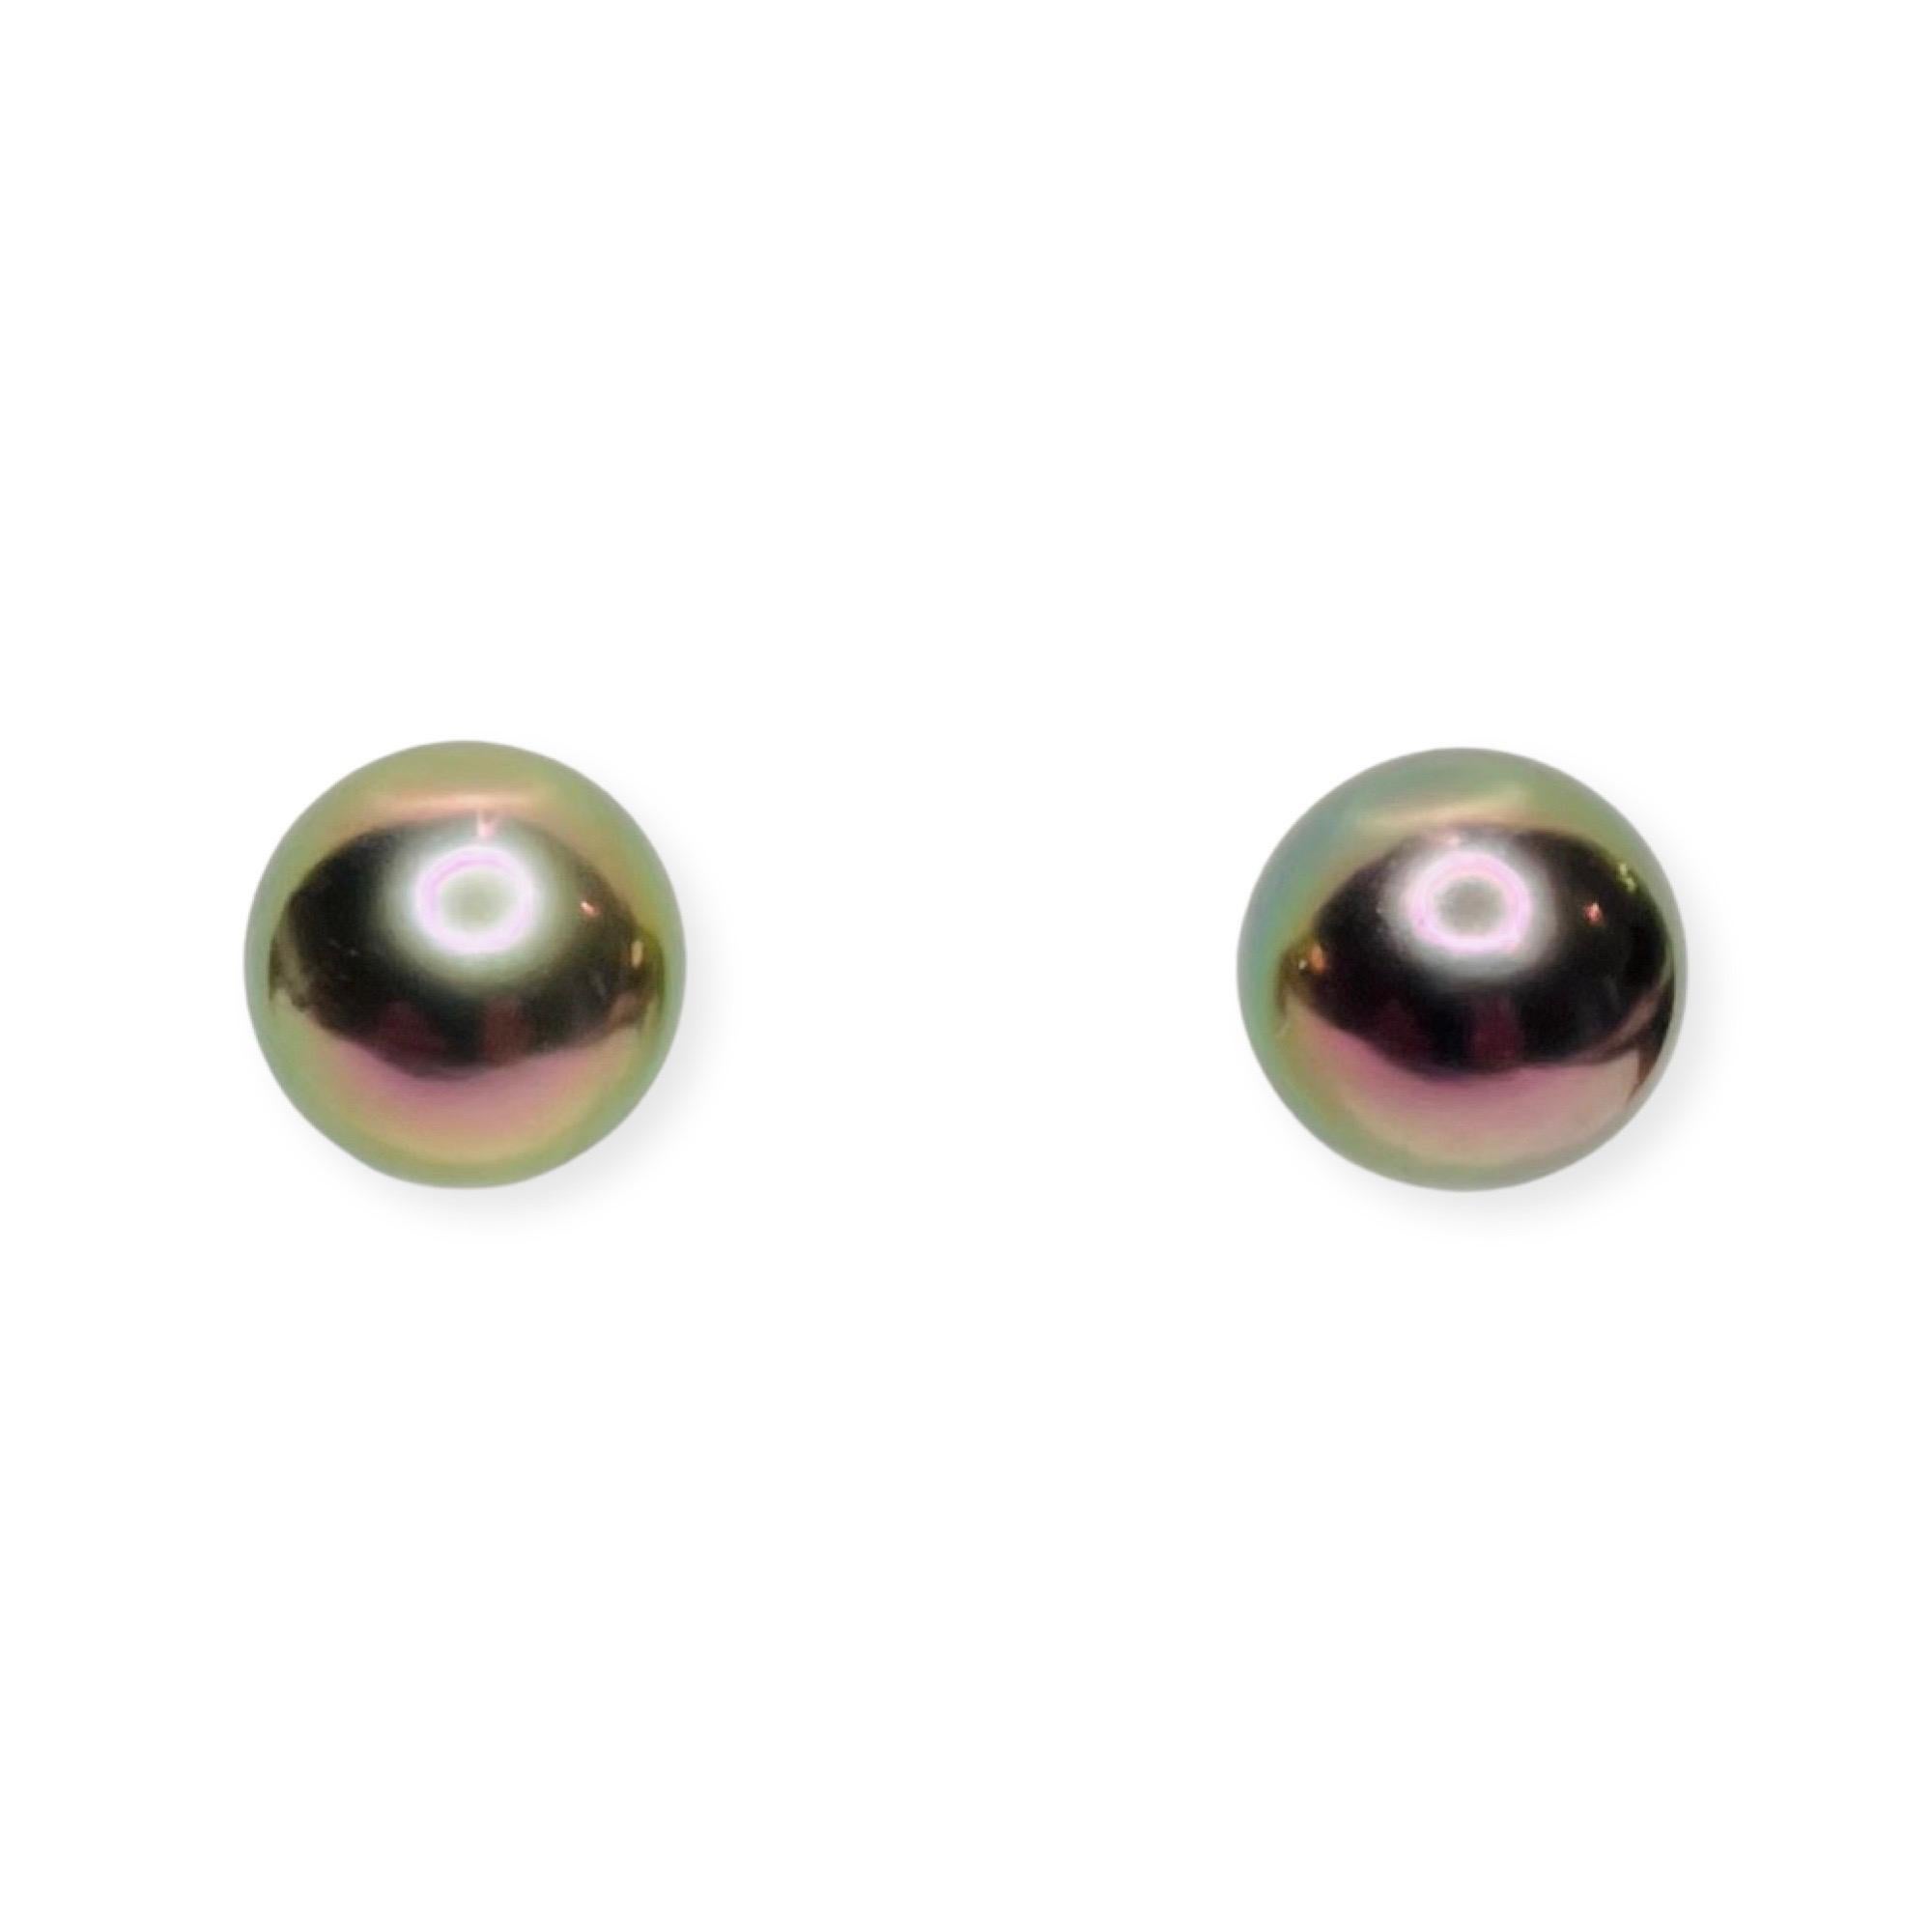 Lithos 18K Yellow Gold Natural Color Cultured Black Tahitian Pearl Earrings. The Pearls are 8.5 mm x 9.0 mm. The pearls are round, slightly blemished with high luster. They are well matched. They have a rose overtone. These are Stud earrings with